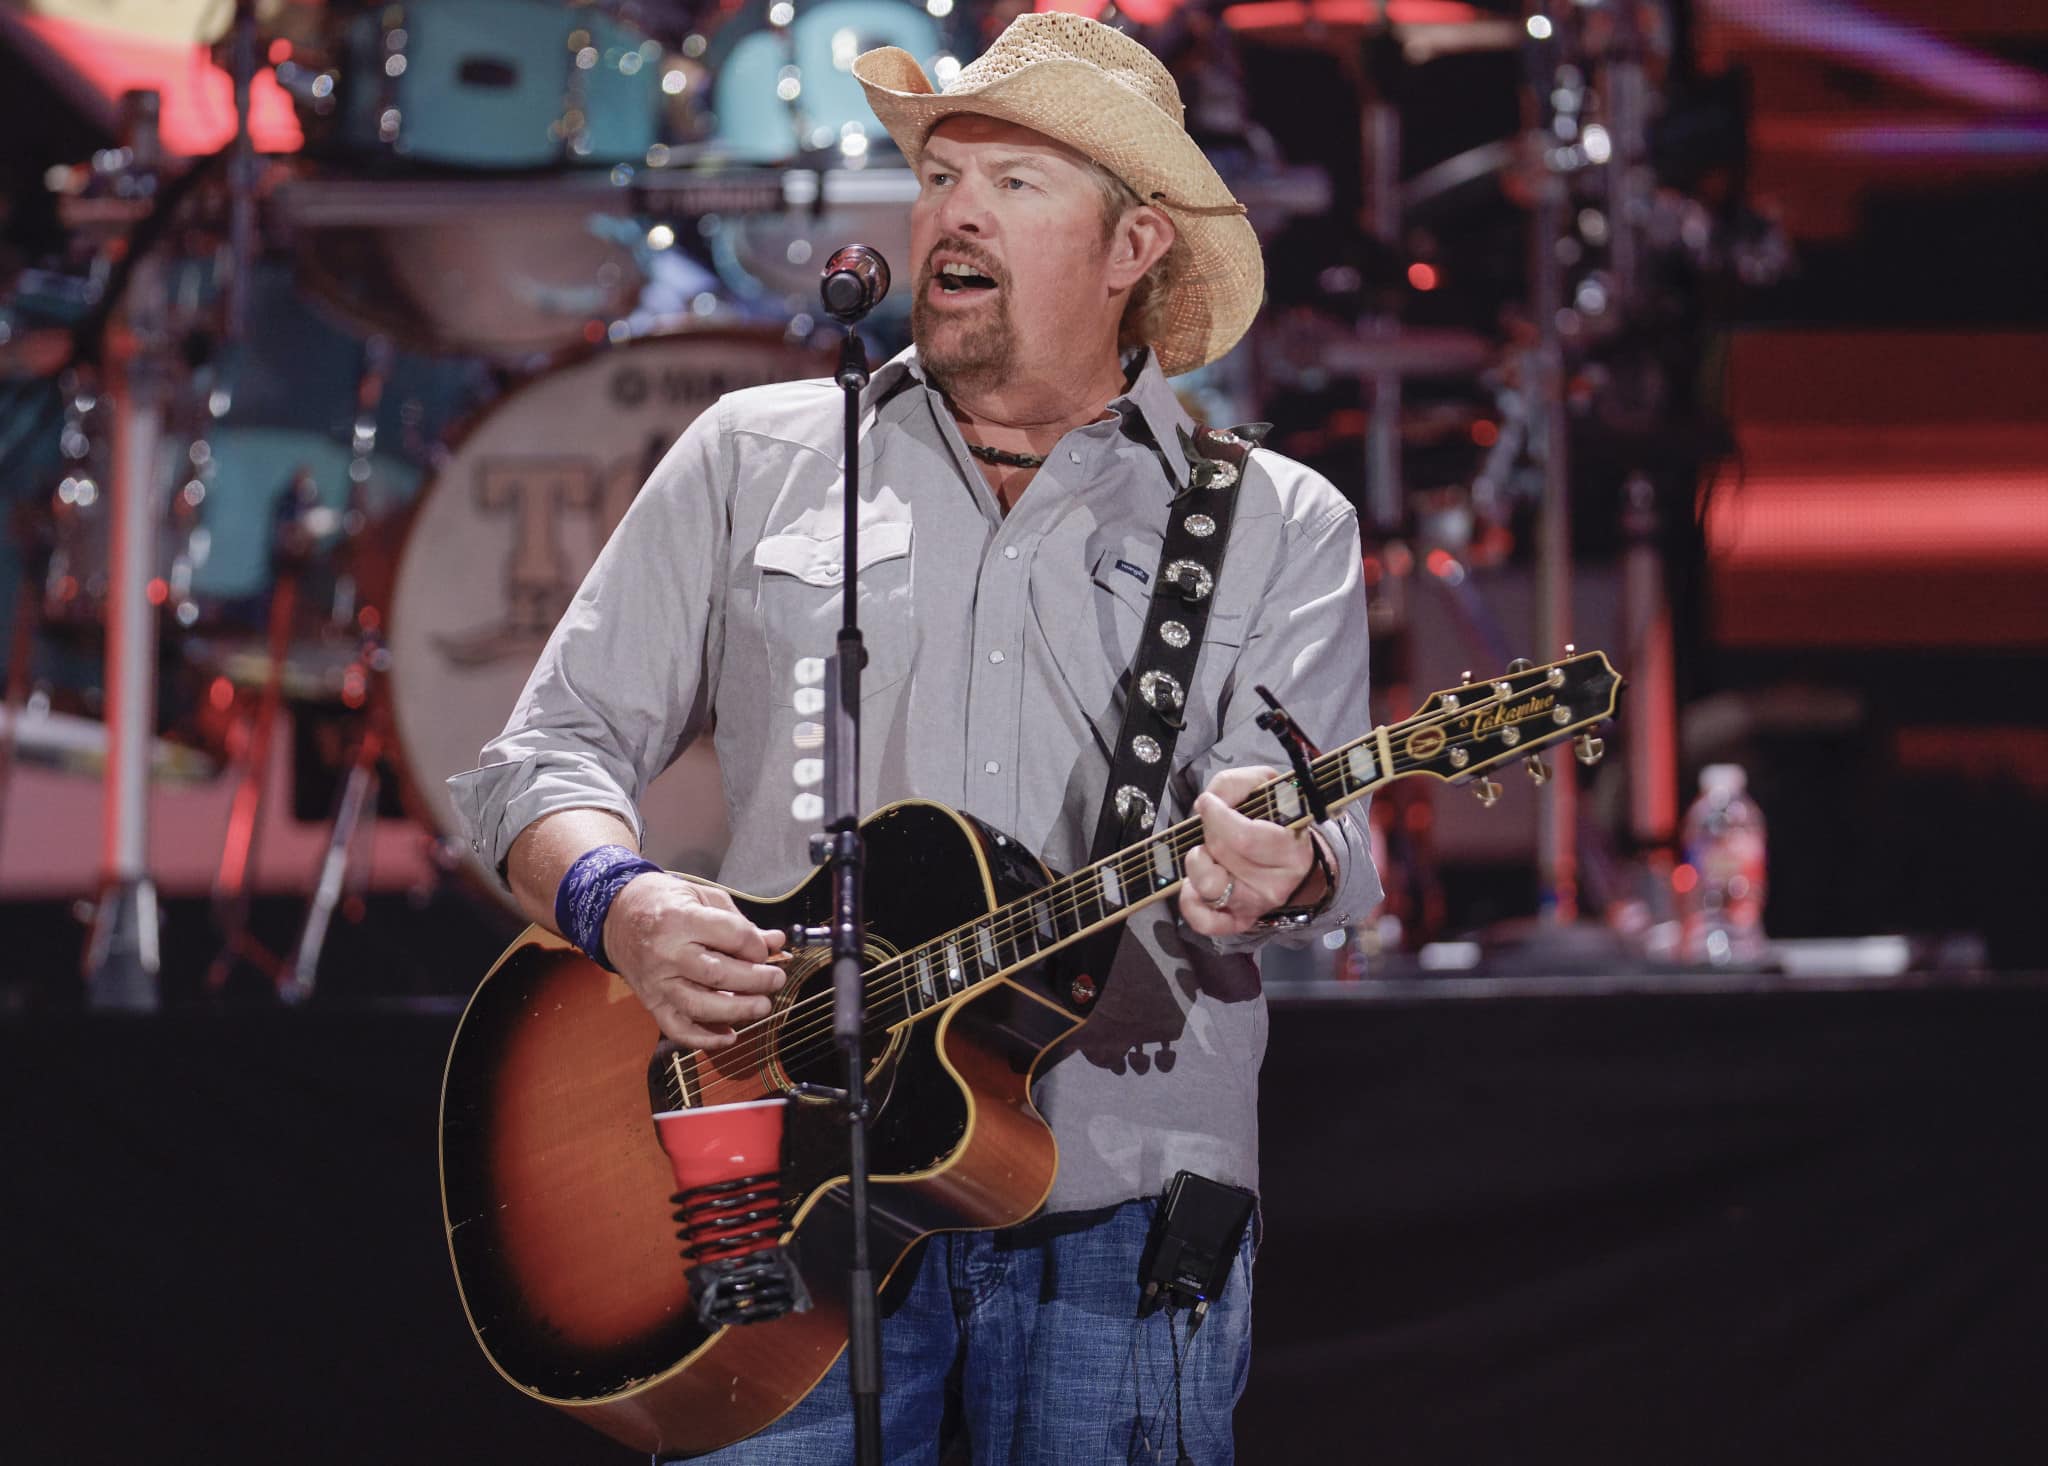 AUSTIN, TX - OCTOBER 30: Toby Keith performs during the 2021 iHeartCountry Festival at Frank Irwin Center on October 30, 2021 in Austin, Texas. (Photo by Michael Hickey/Getty Images)